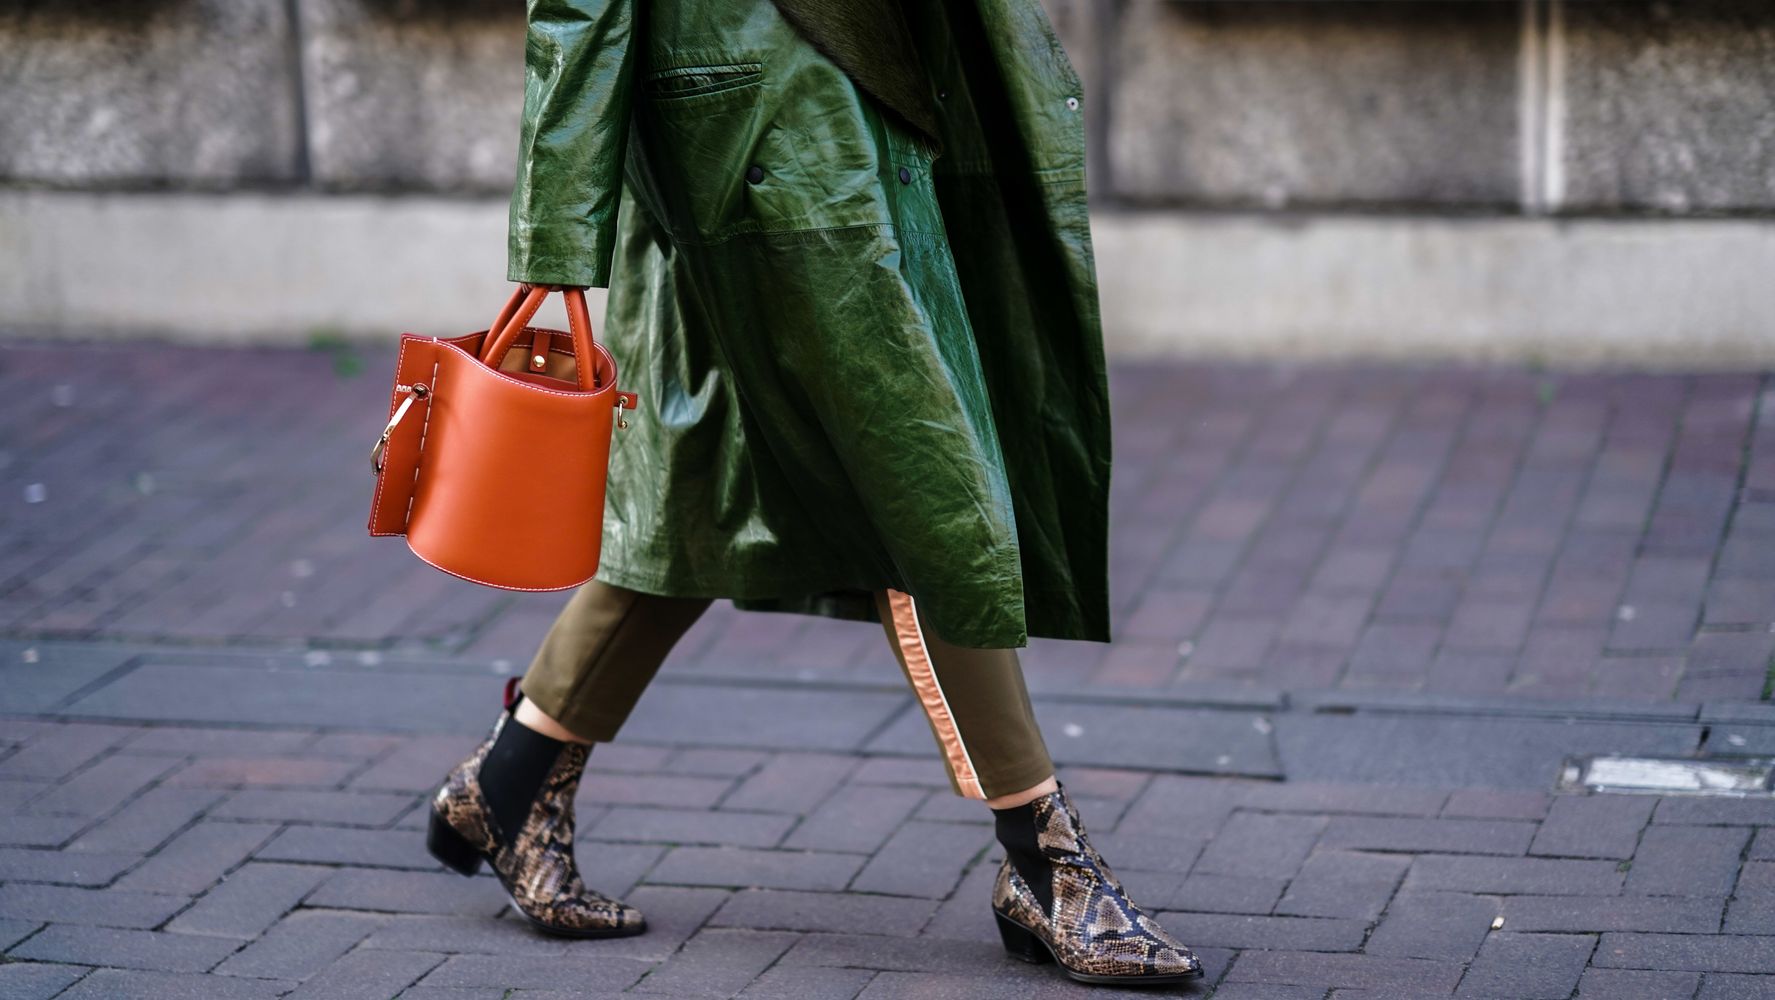 17 Affordable Bags For Spring 2019 To Slay For Less